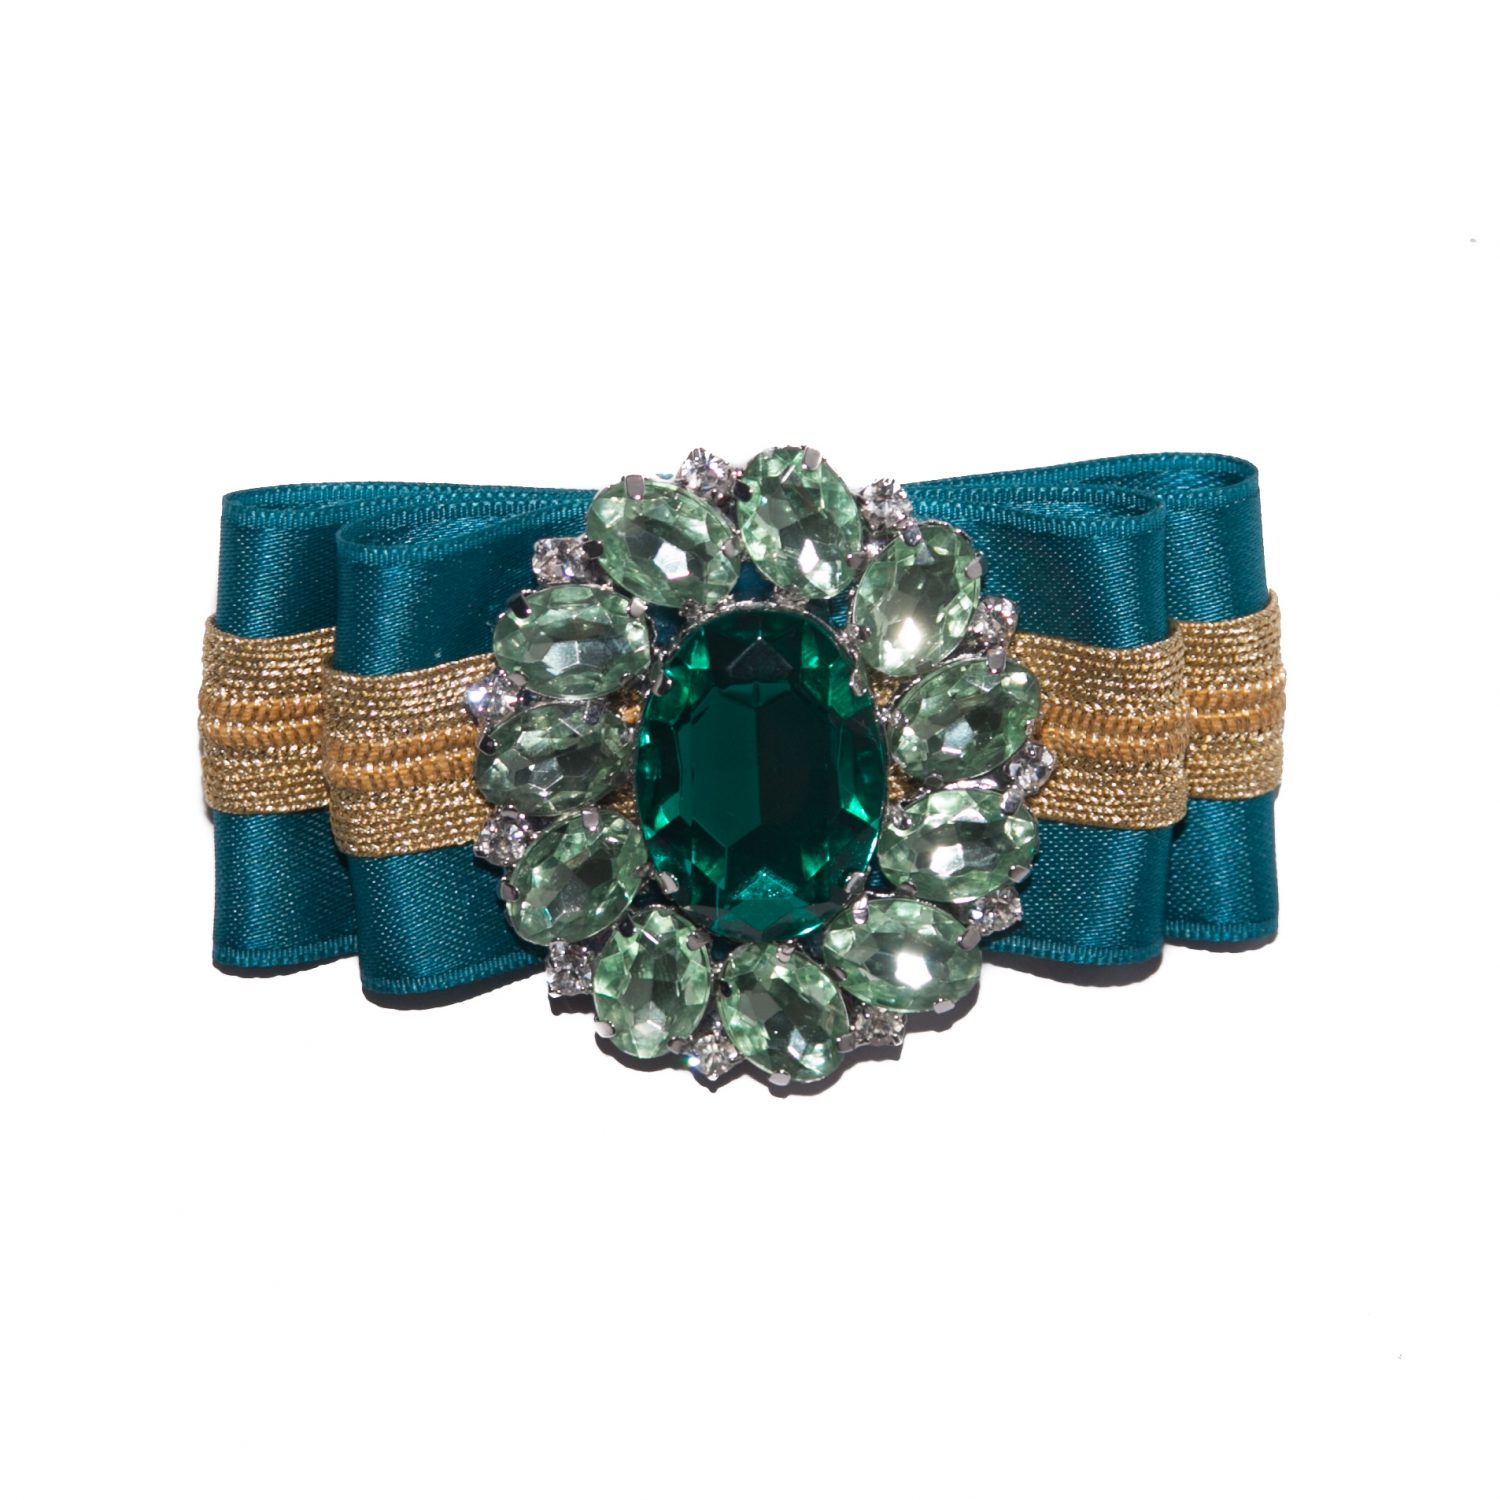 Amazing new trend Strik, Bow, Brooch in Dark Turquoise with gold accent ribbon and extra large Multicolor Green Glass Brooch in center online kopen buy www.axelles.be